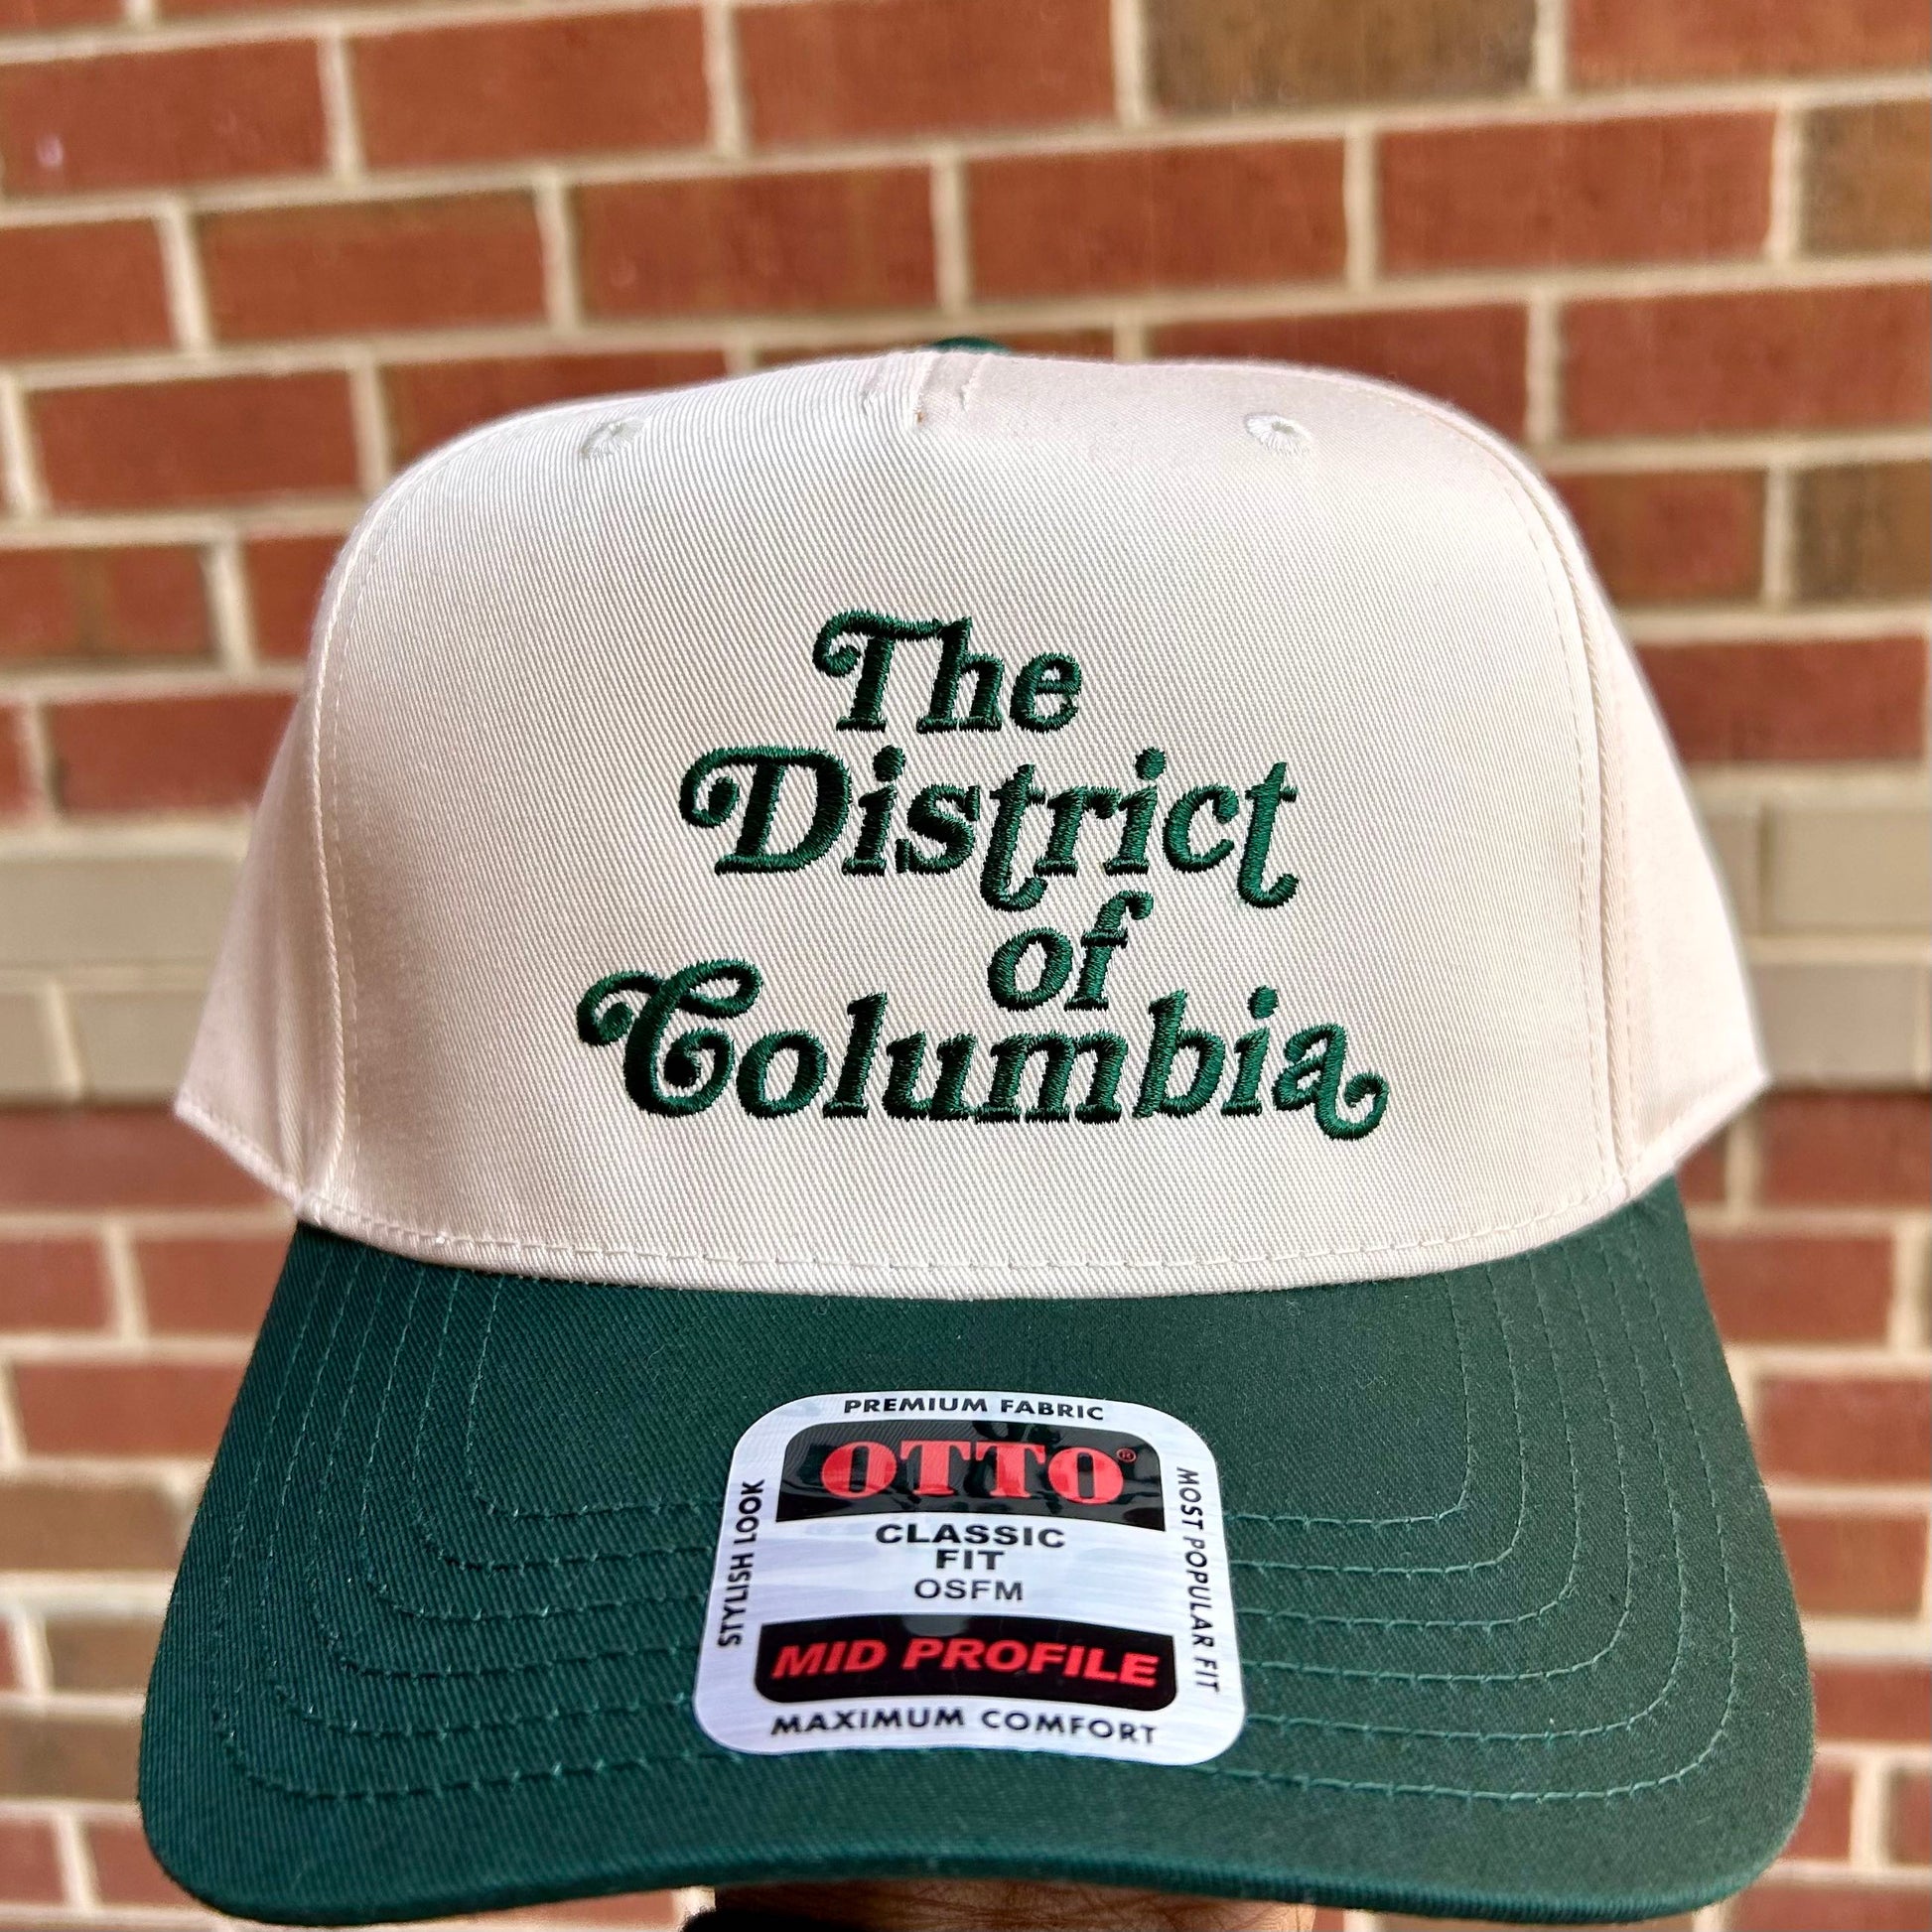 Adjustable Seal of The District of Columbia Baseball Cap for Men